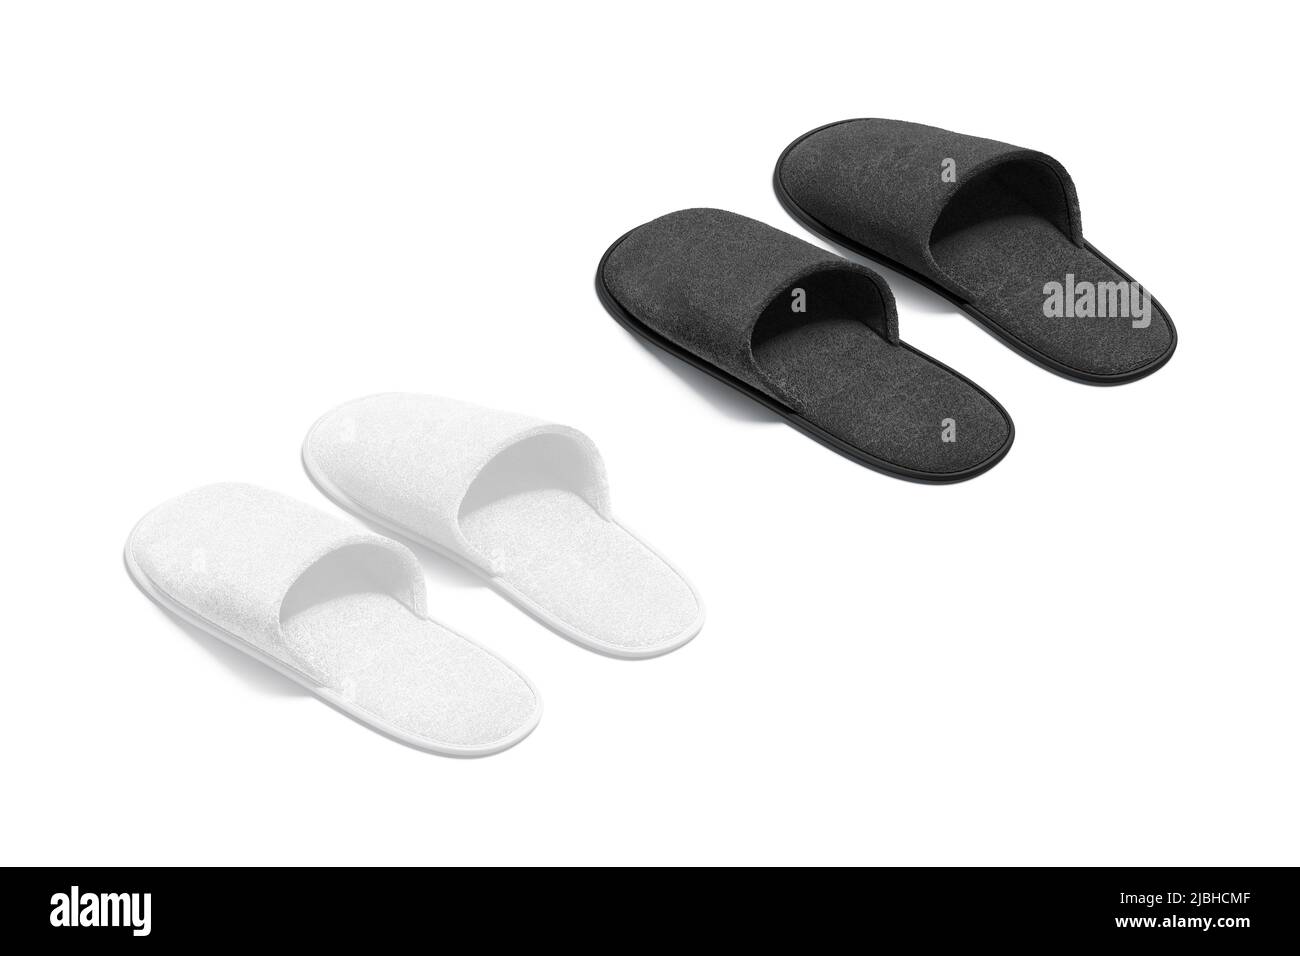 Blank black and white home slippers mockup, back side view Stock Photo